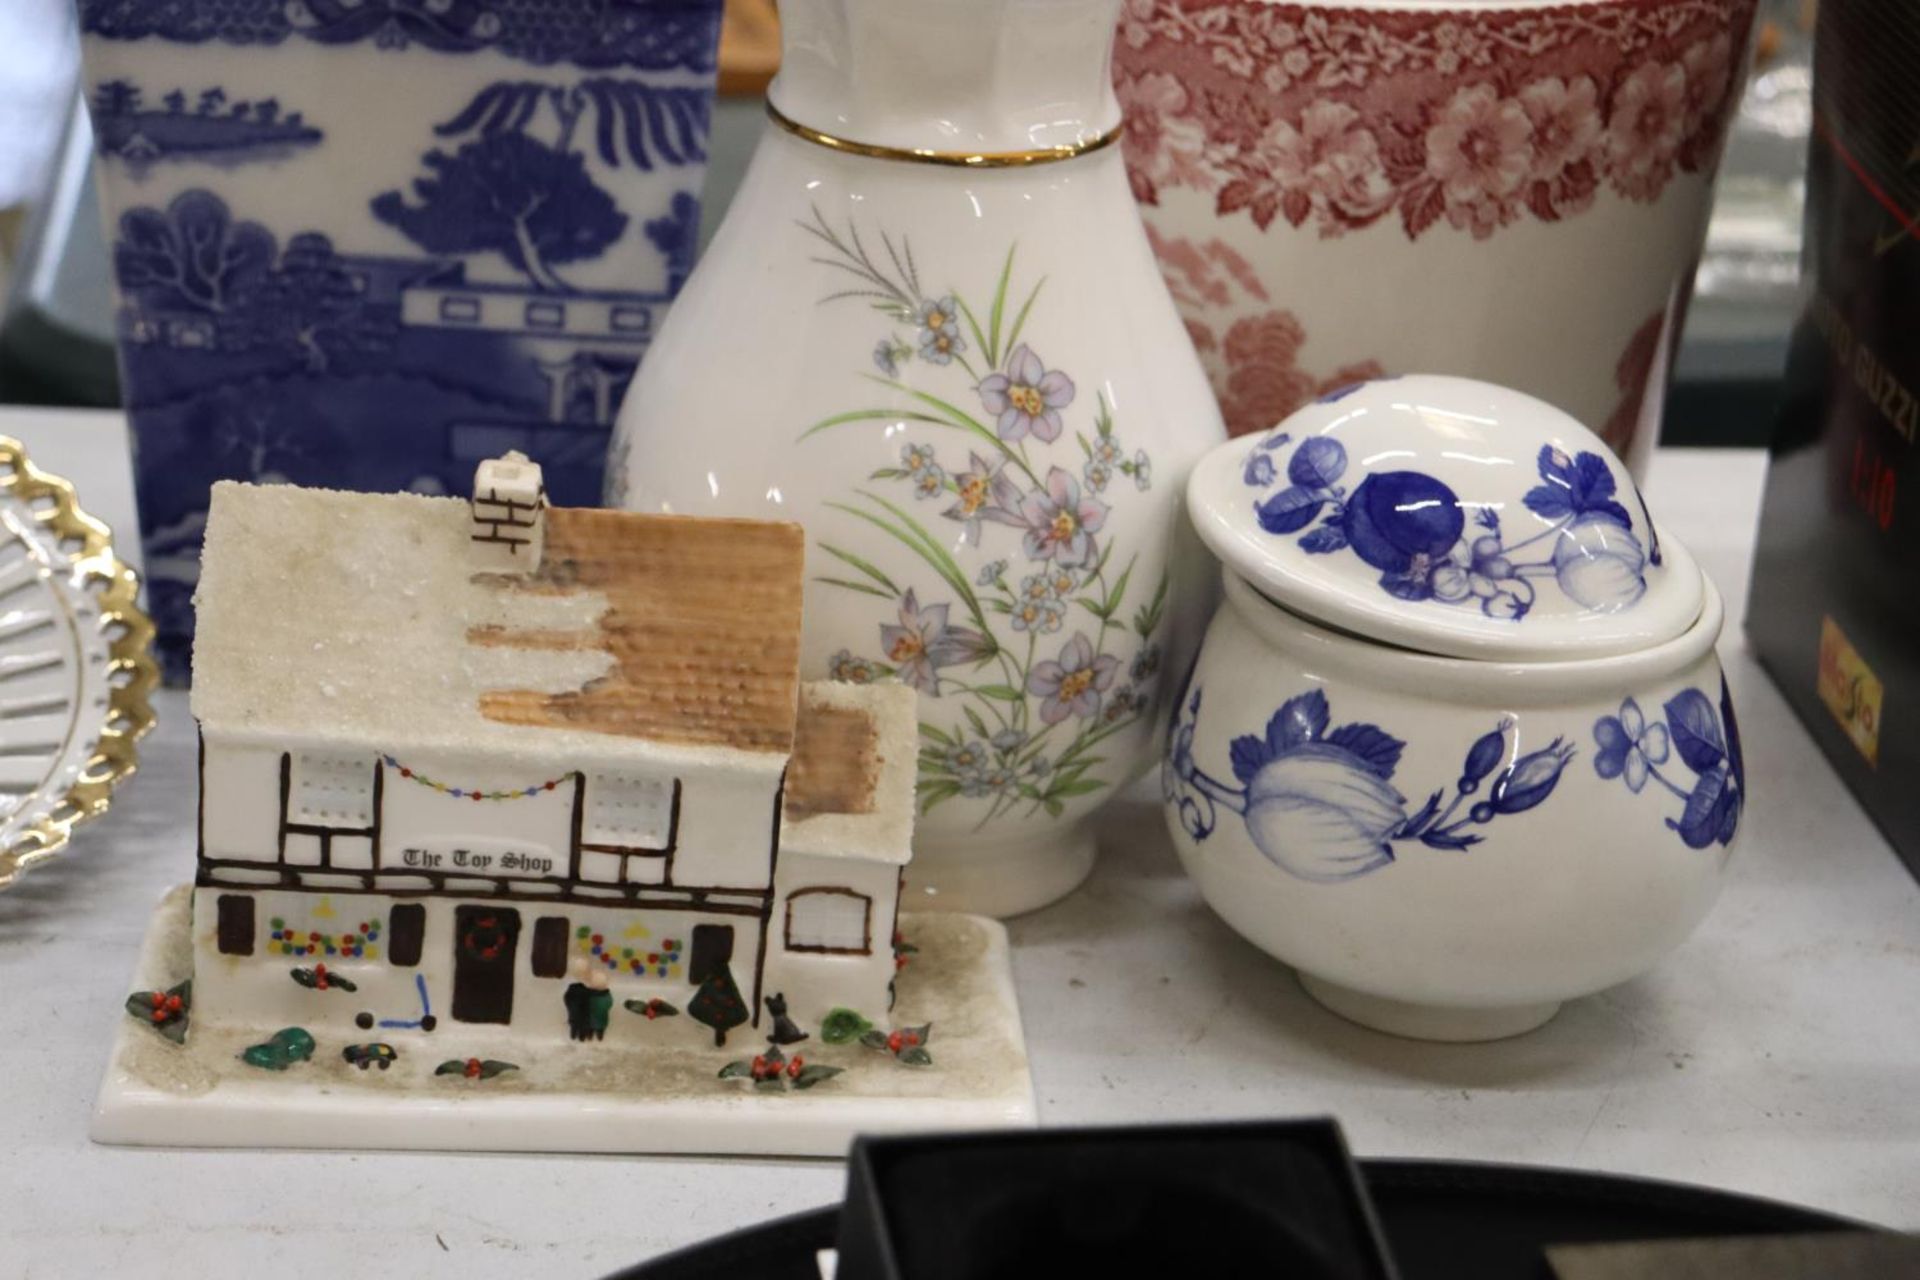 A QUANTITY OF CERAMIC ITEMS TO INCLUDE A PLANTER, VASES, A LIDDED POT AND A COTTAGE - Image 2 of 5